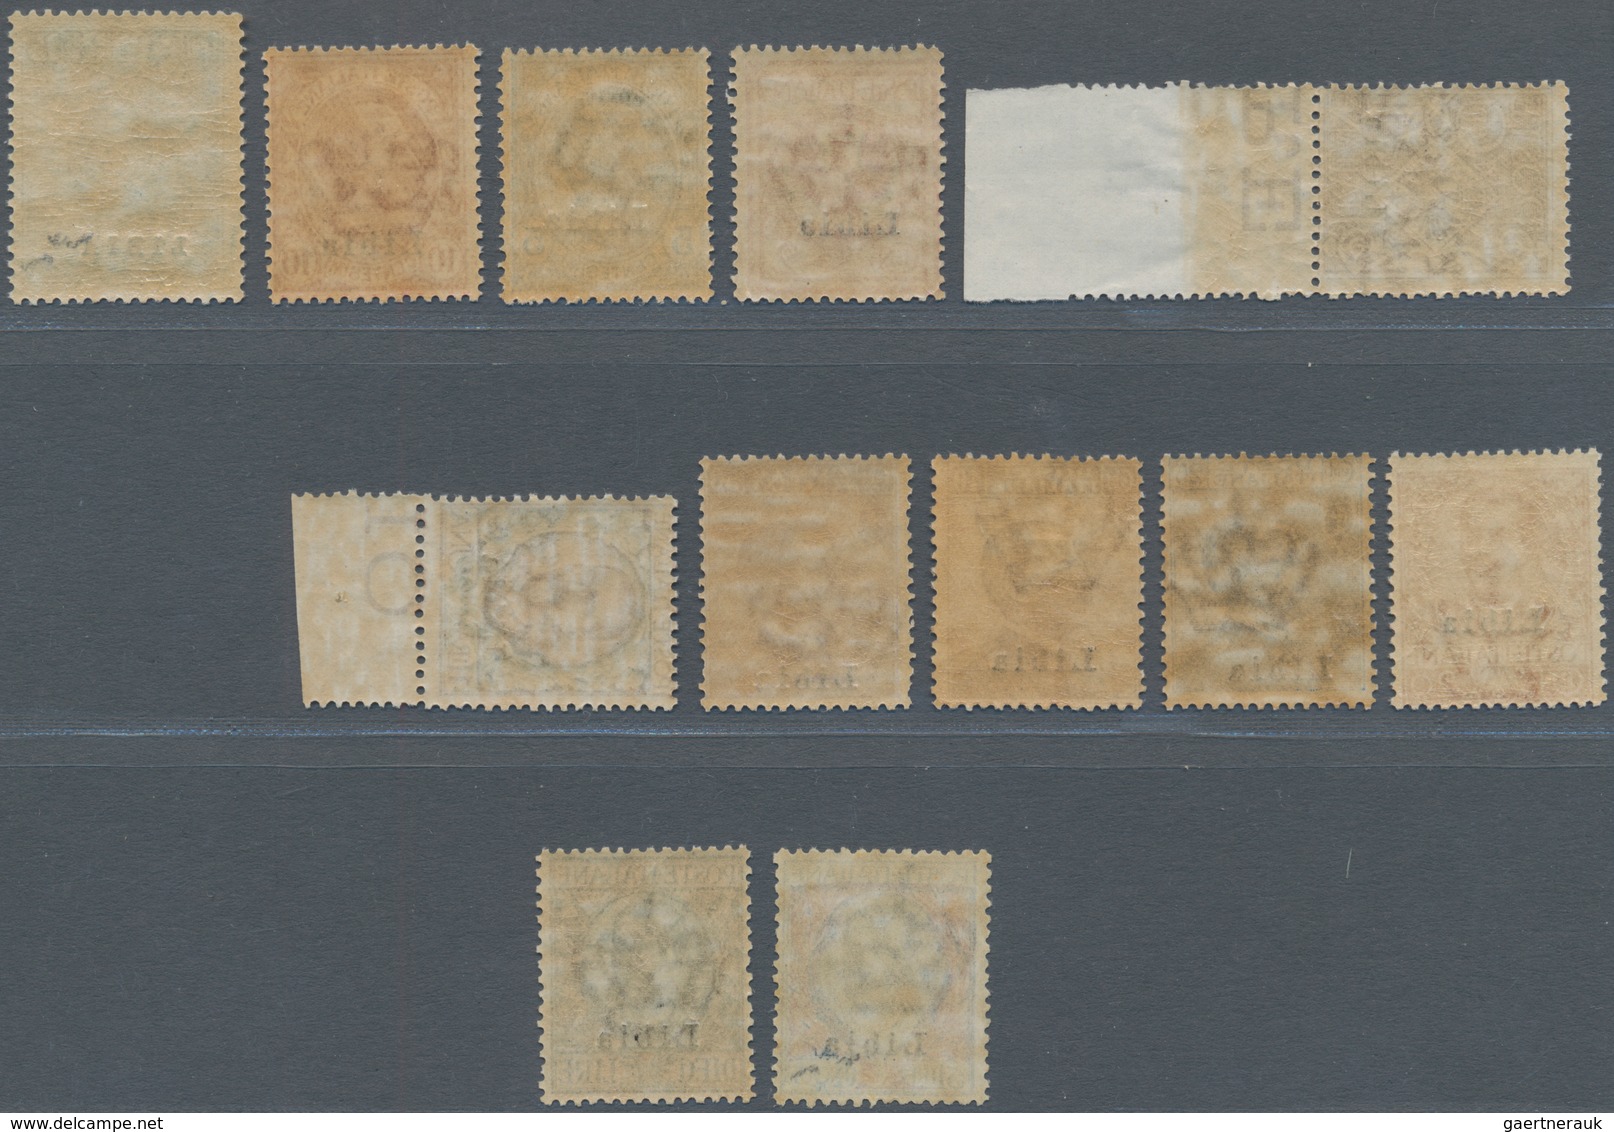 Italienisch-Libyen: 1912/1915: Stamps Of Italy "Michetti" And "Floreale" With Overprint LIBIA, Compl - Libya